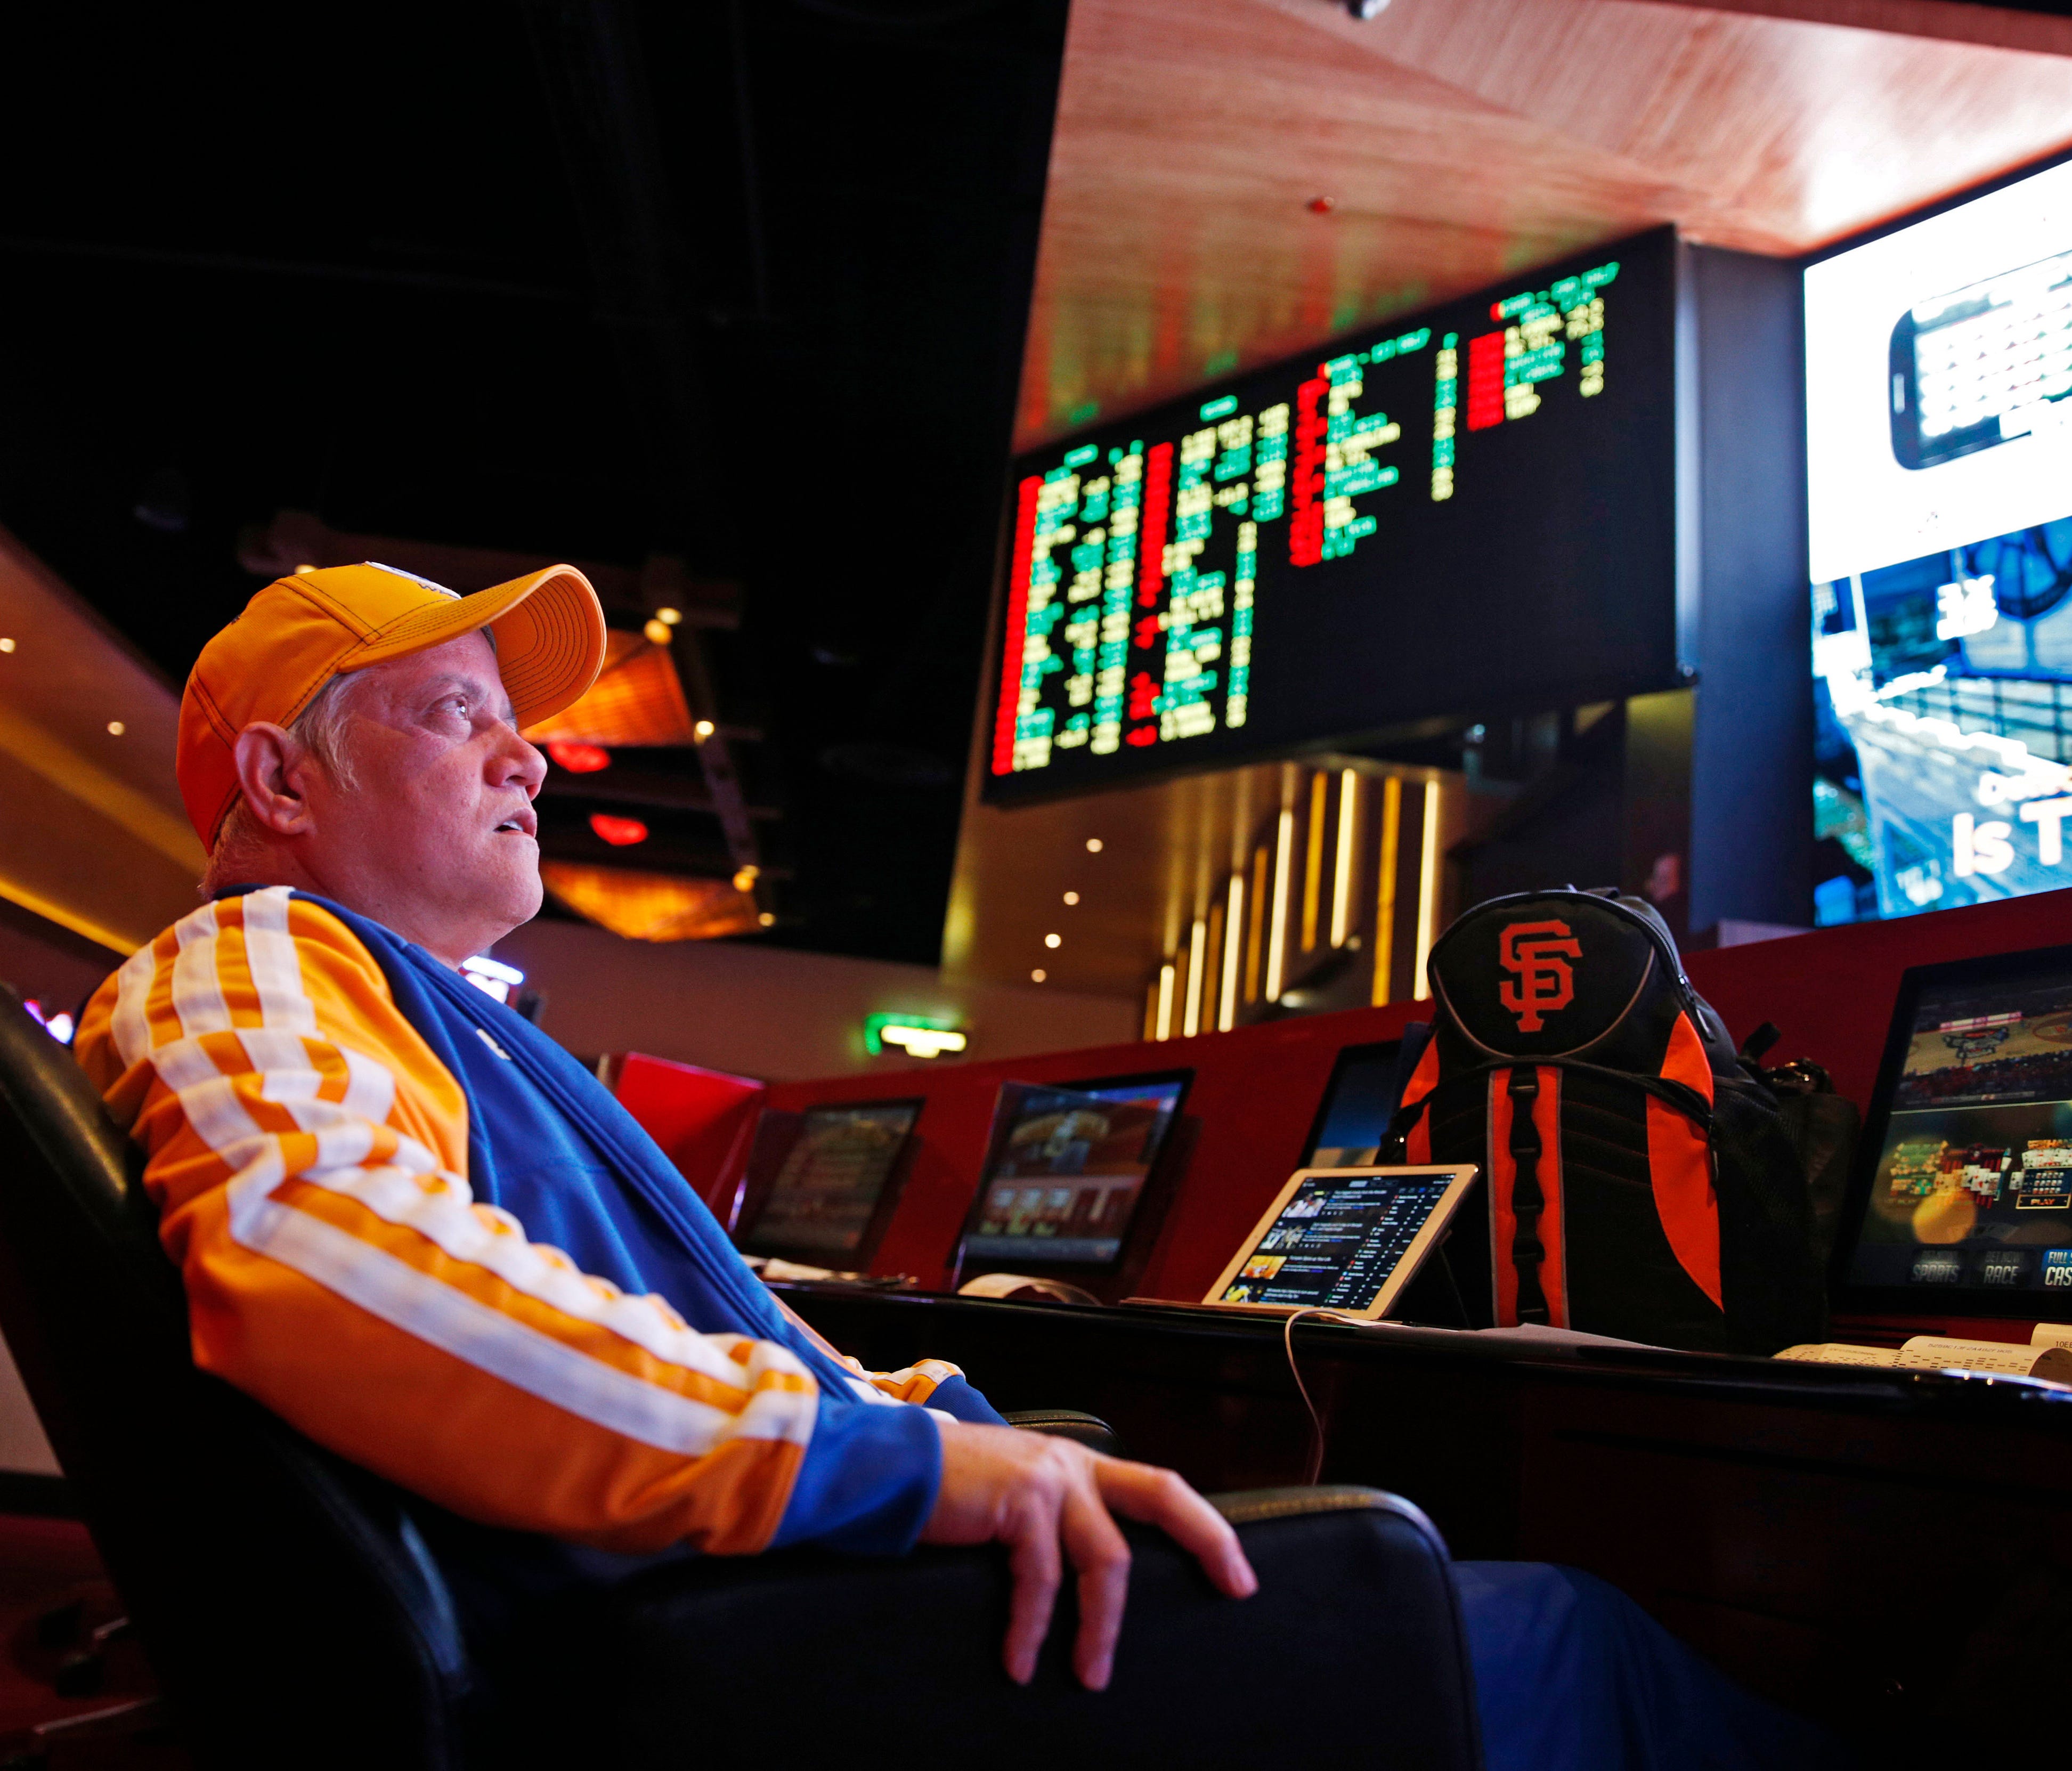 The Supreme Court takes up a case Monday that could decide the future of legal sports betting in the United States.